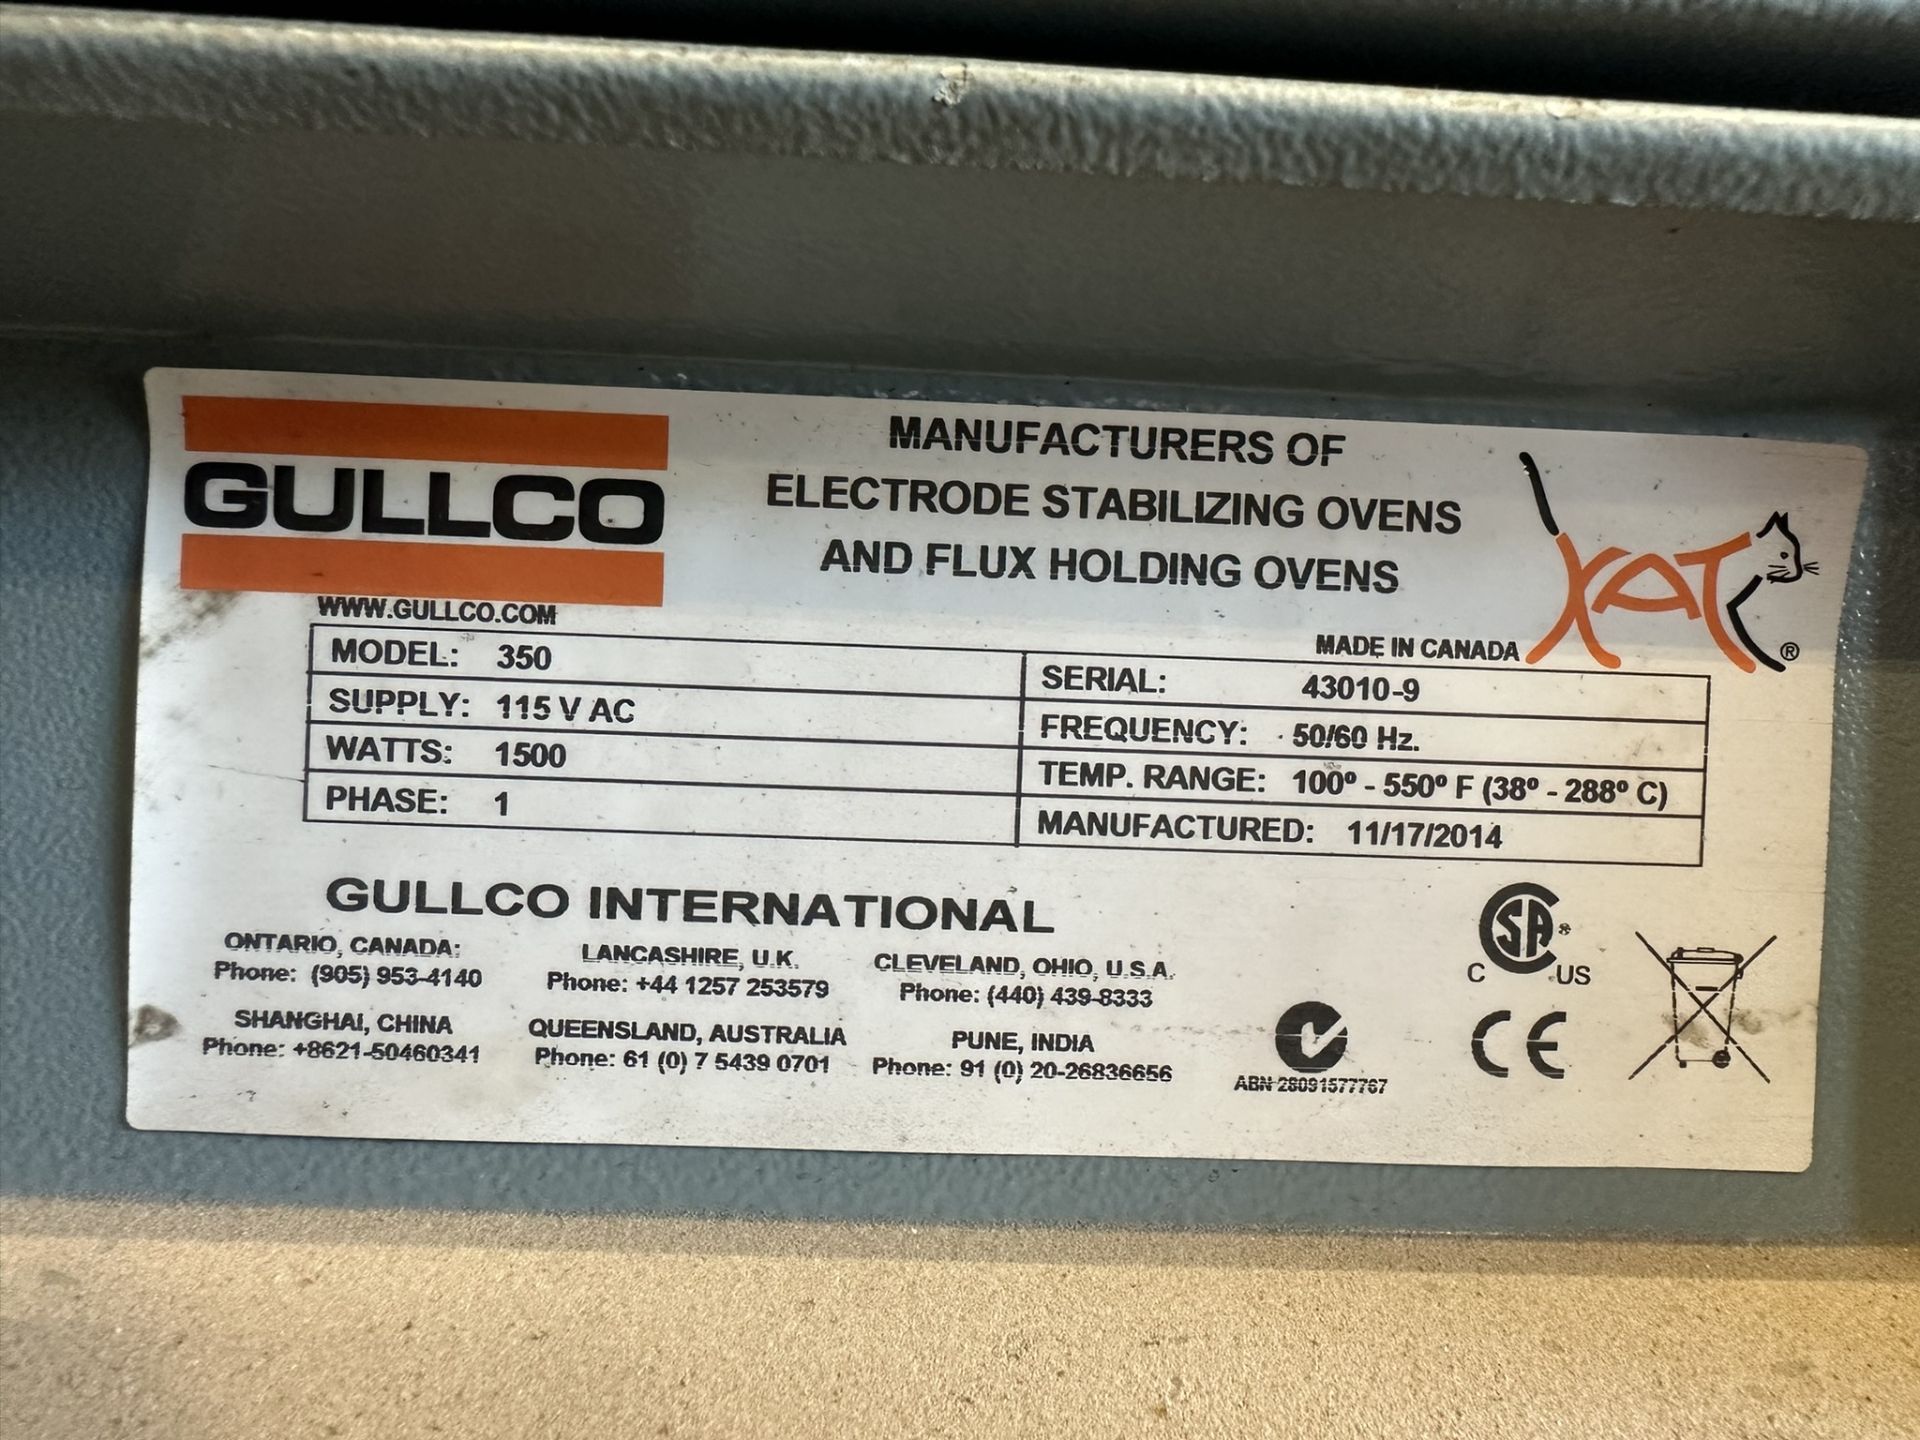 *OFFSITE* GULLCO 350 ELECTRODE STABILIZING OVEN W/ STEEL STAND, S/N 43010-9 - Image 6 of 6